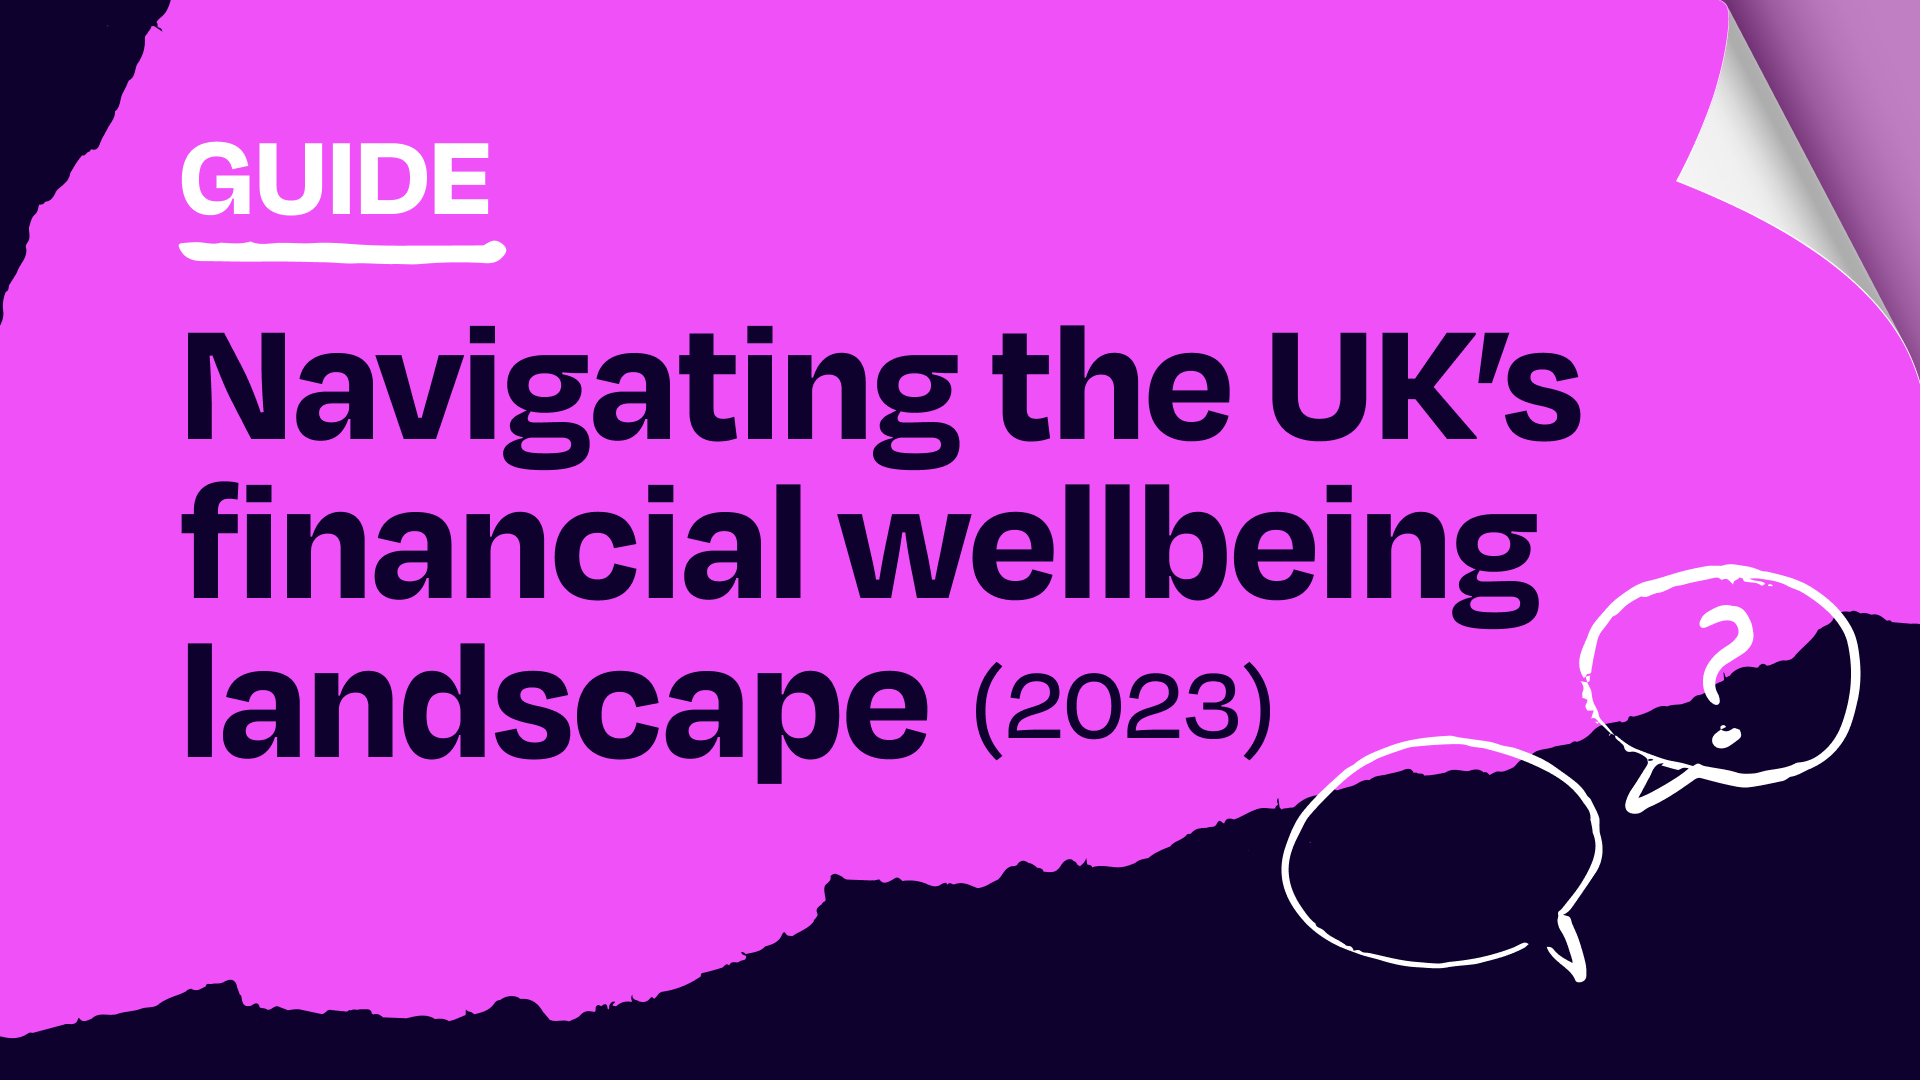 Guide to Financial Wellbeing Providers